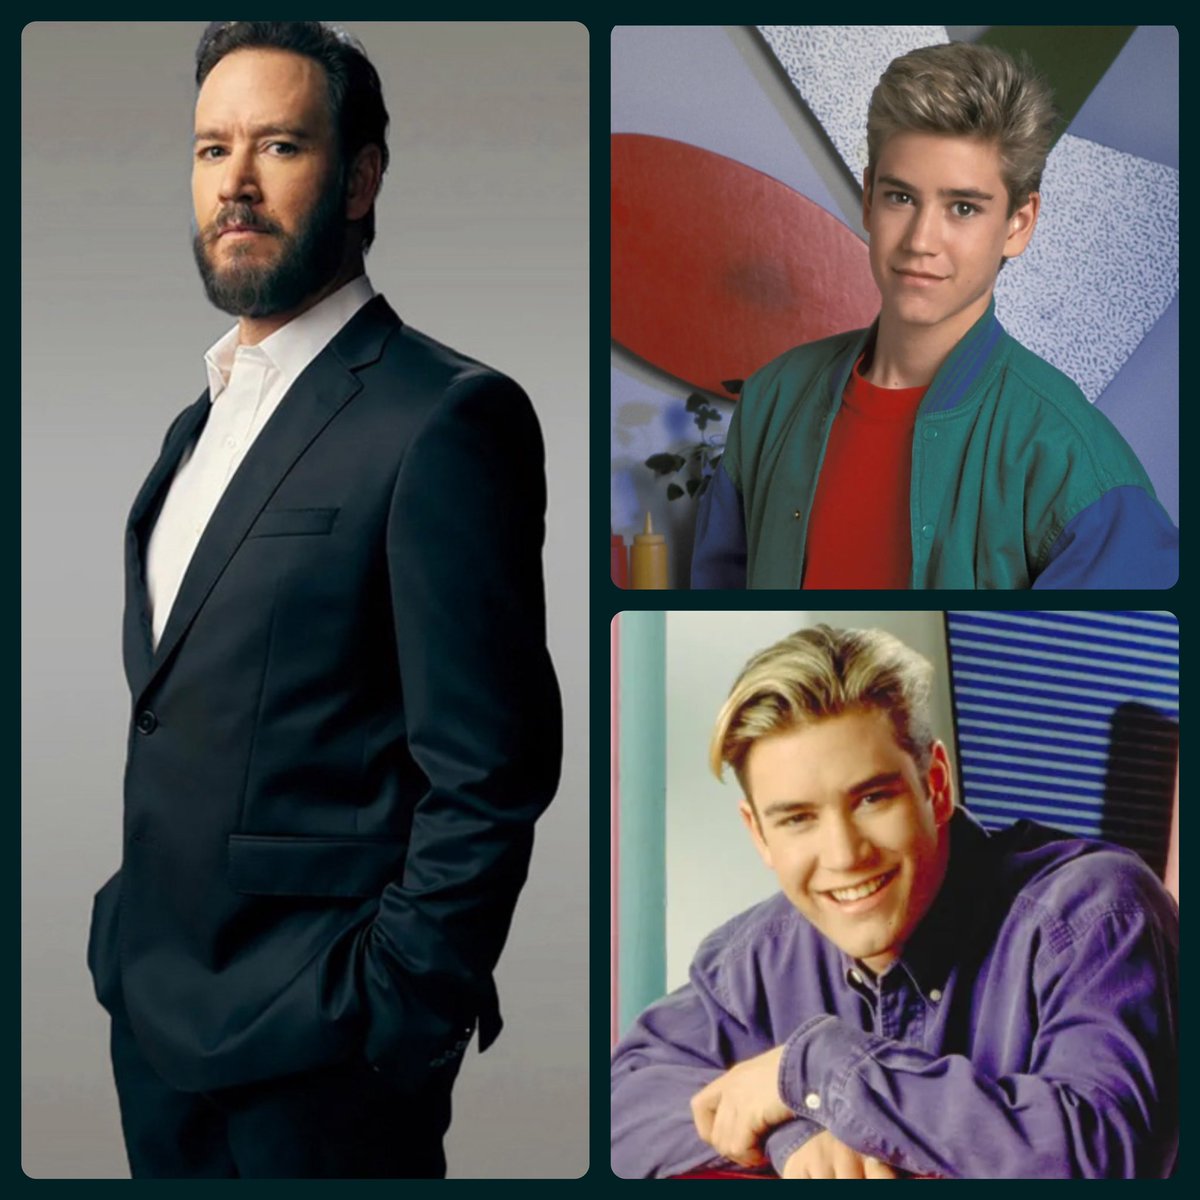 Happy 50th Birthday to #MarkPaulGosselaar! As a former 90s teen, I’d just like to say thanks so much for all the awesome childhood memories! #SavedByTheBell